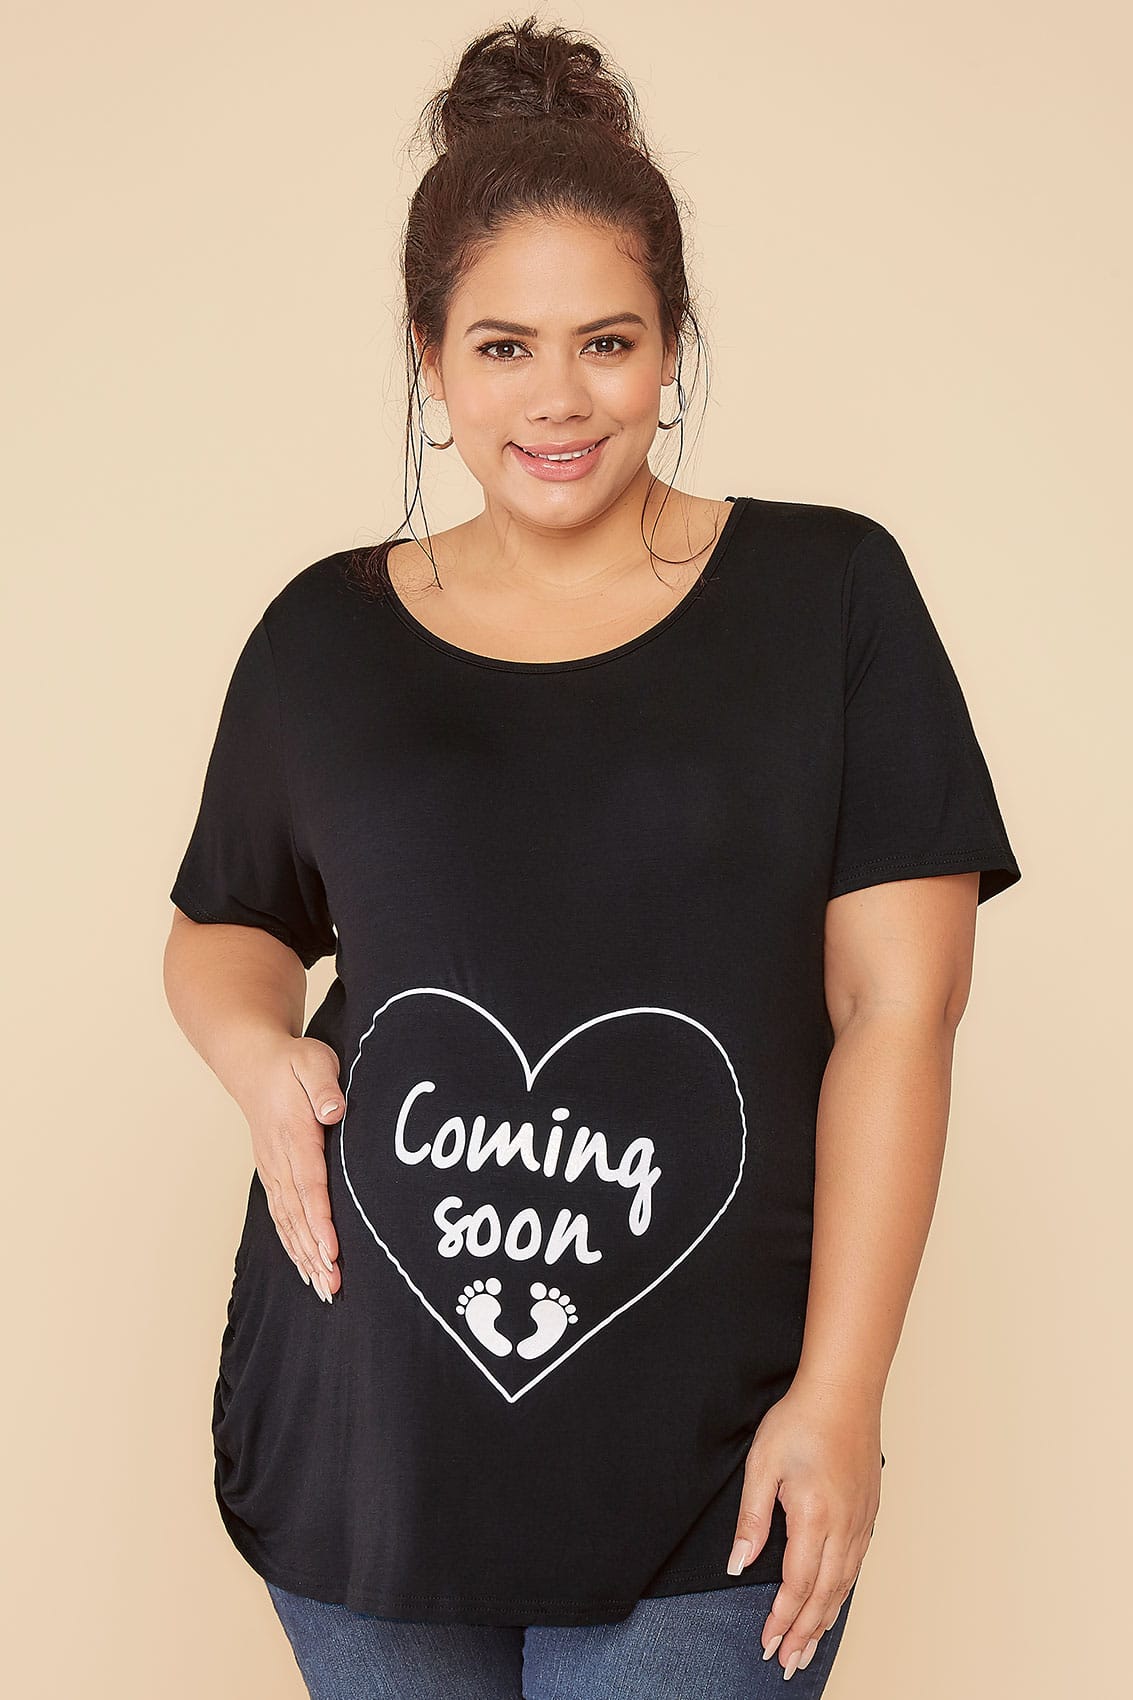 BUMP IT UP MATERNITY Black Top With White Glitter